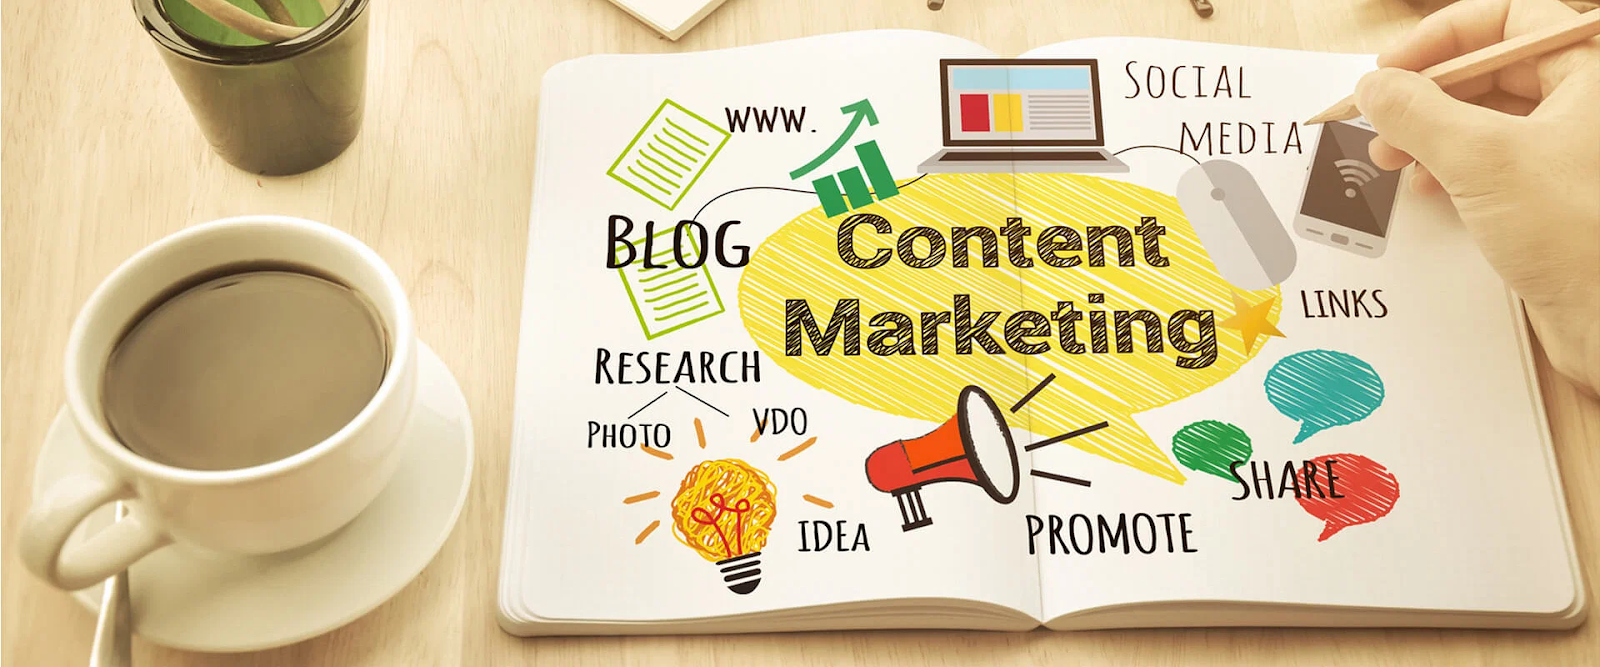 Tailoring a Content Marketing Strategy for Your Brand